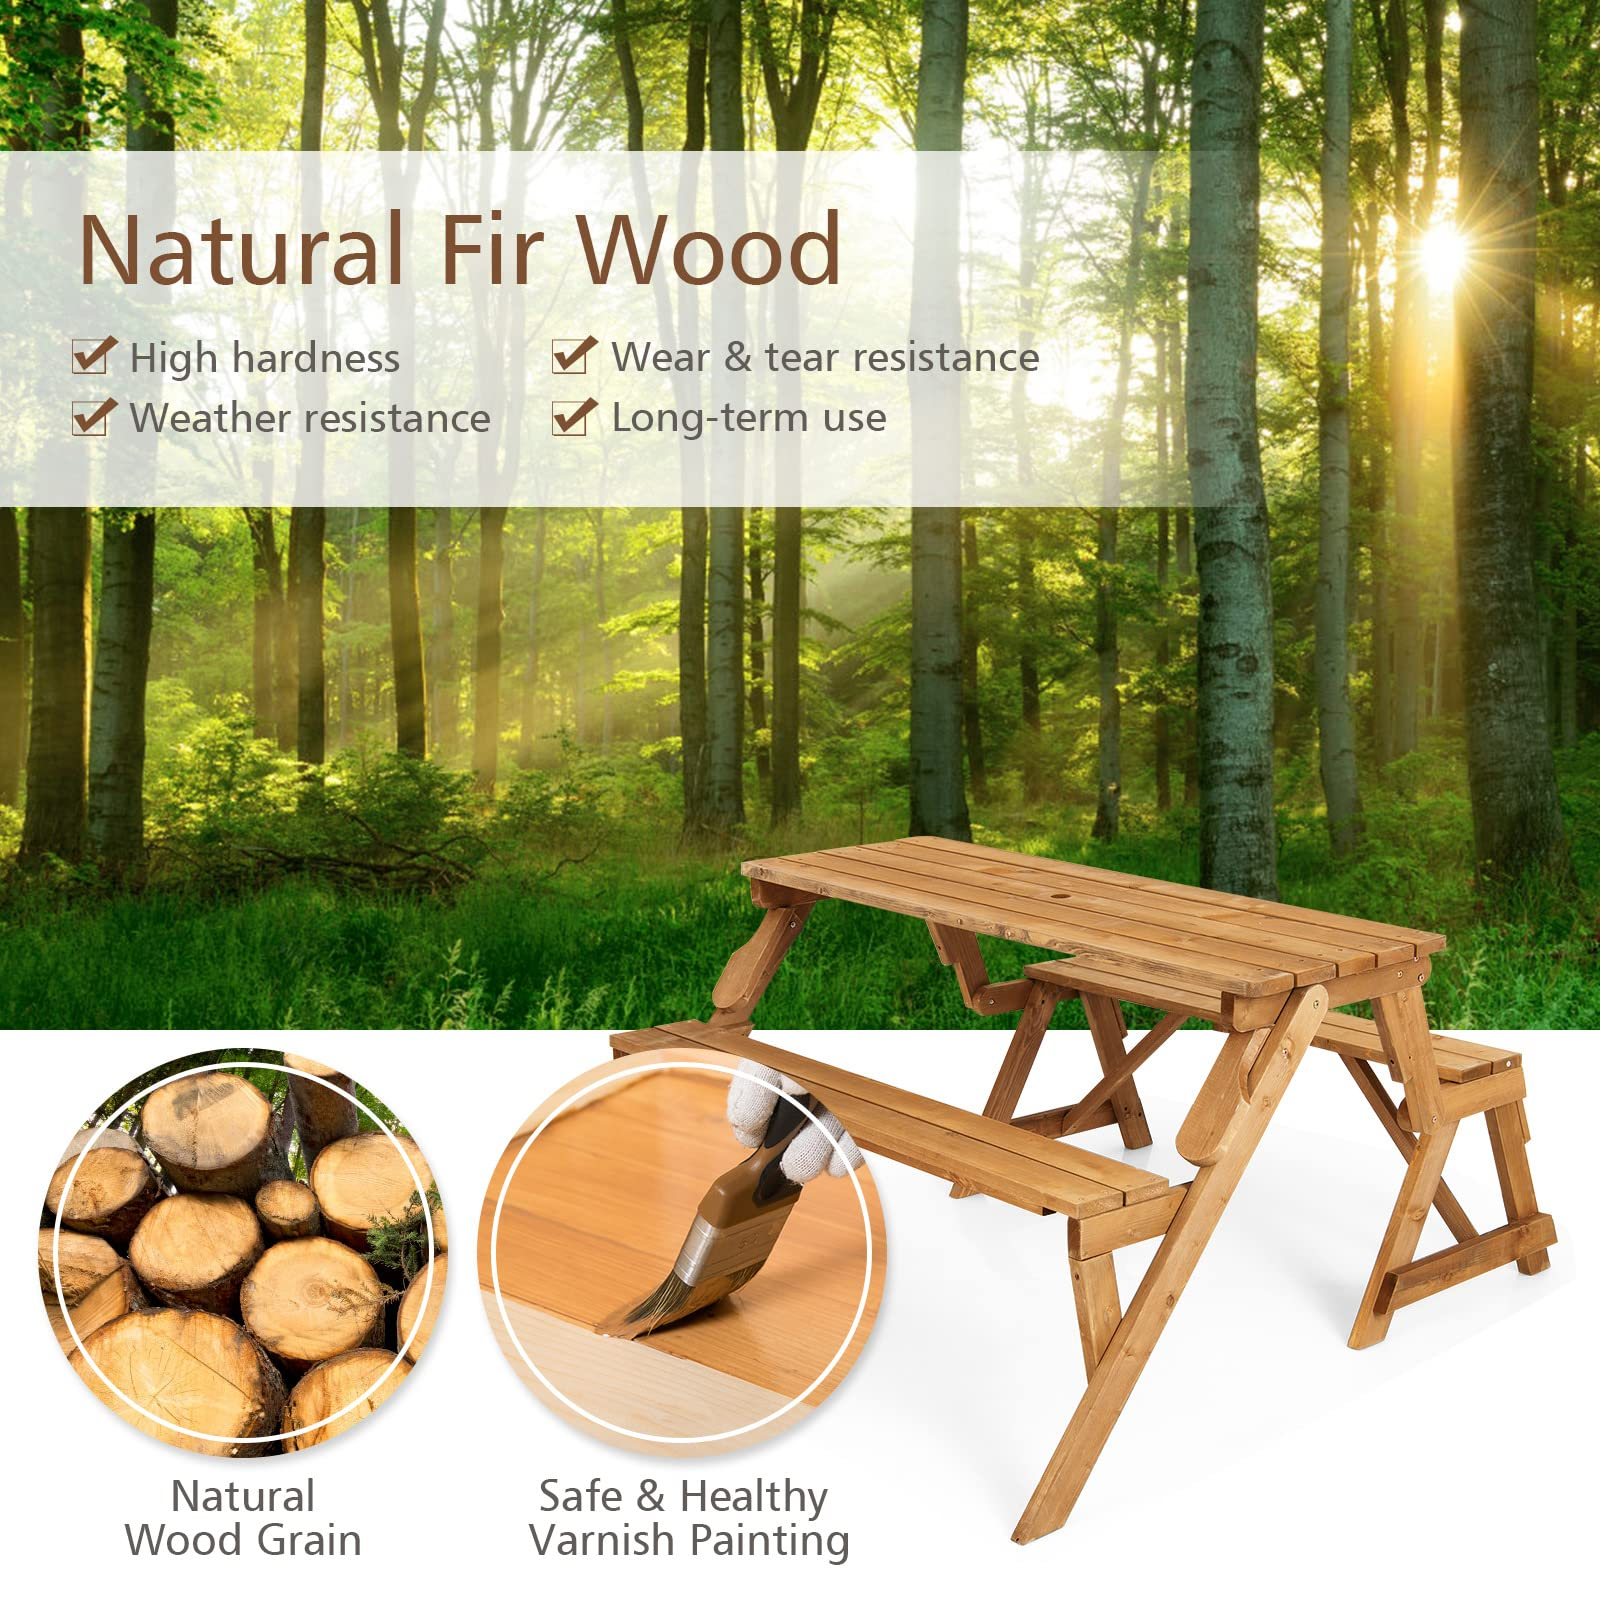 Tangkula 2-in-1 Convertible Wooden Picnic Table, Transforming Interchangeable Outdoor Bench Table with Umbrella Hole